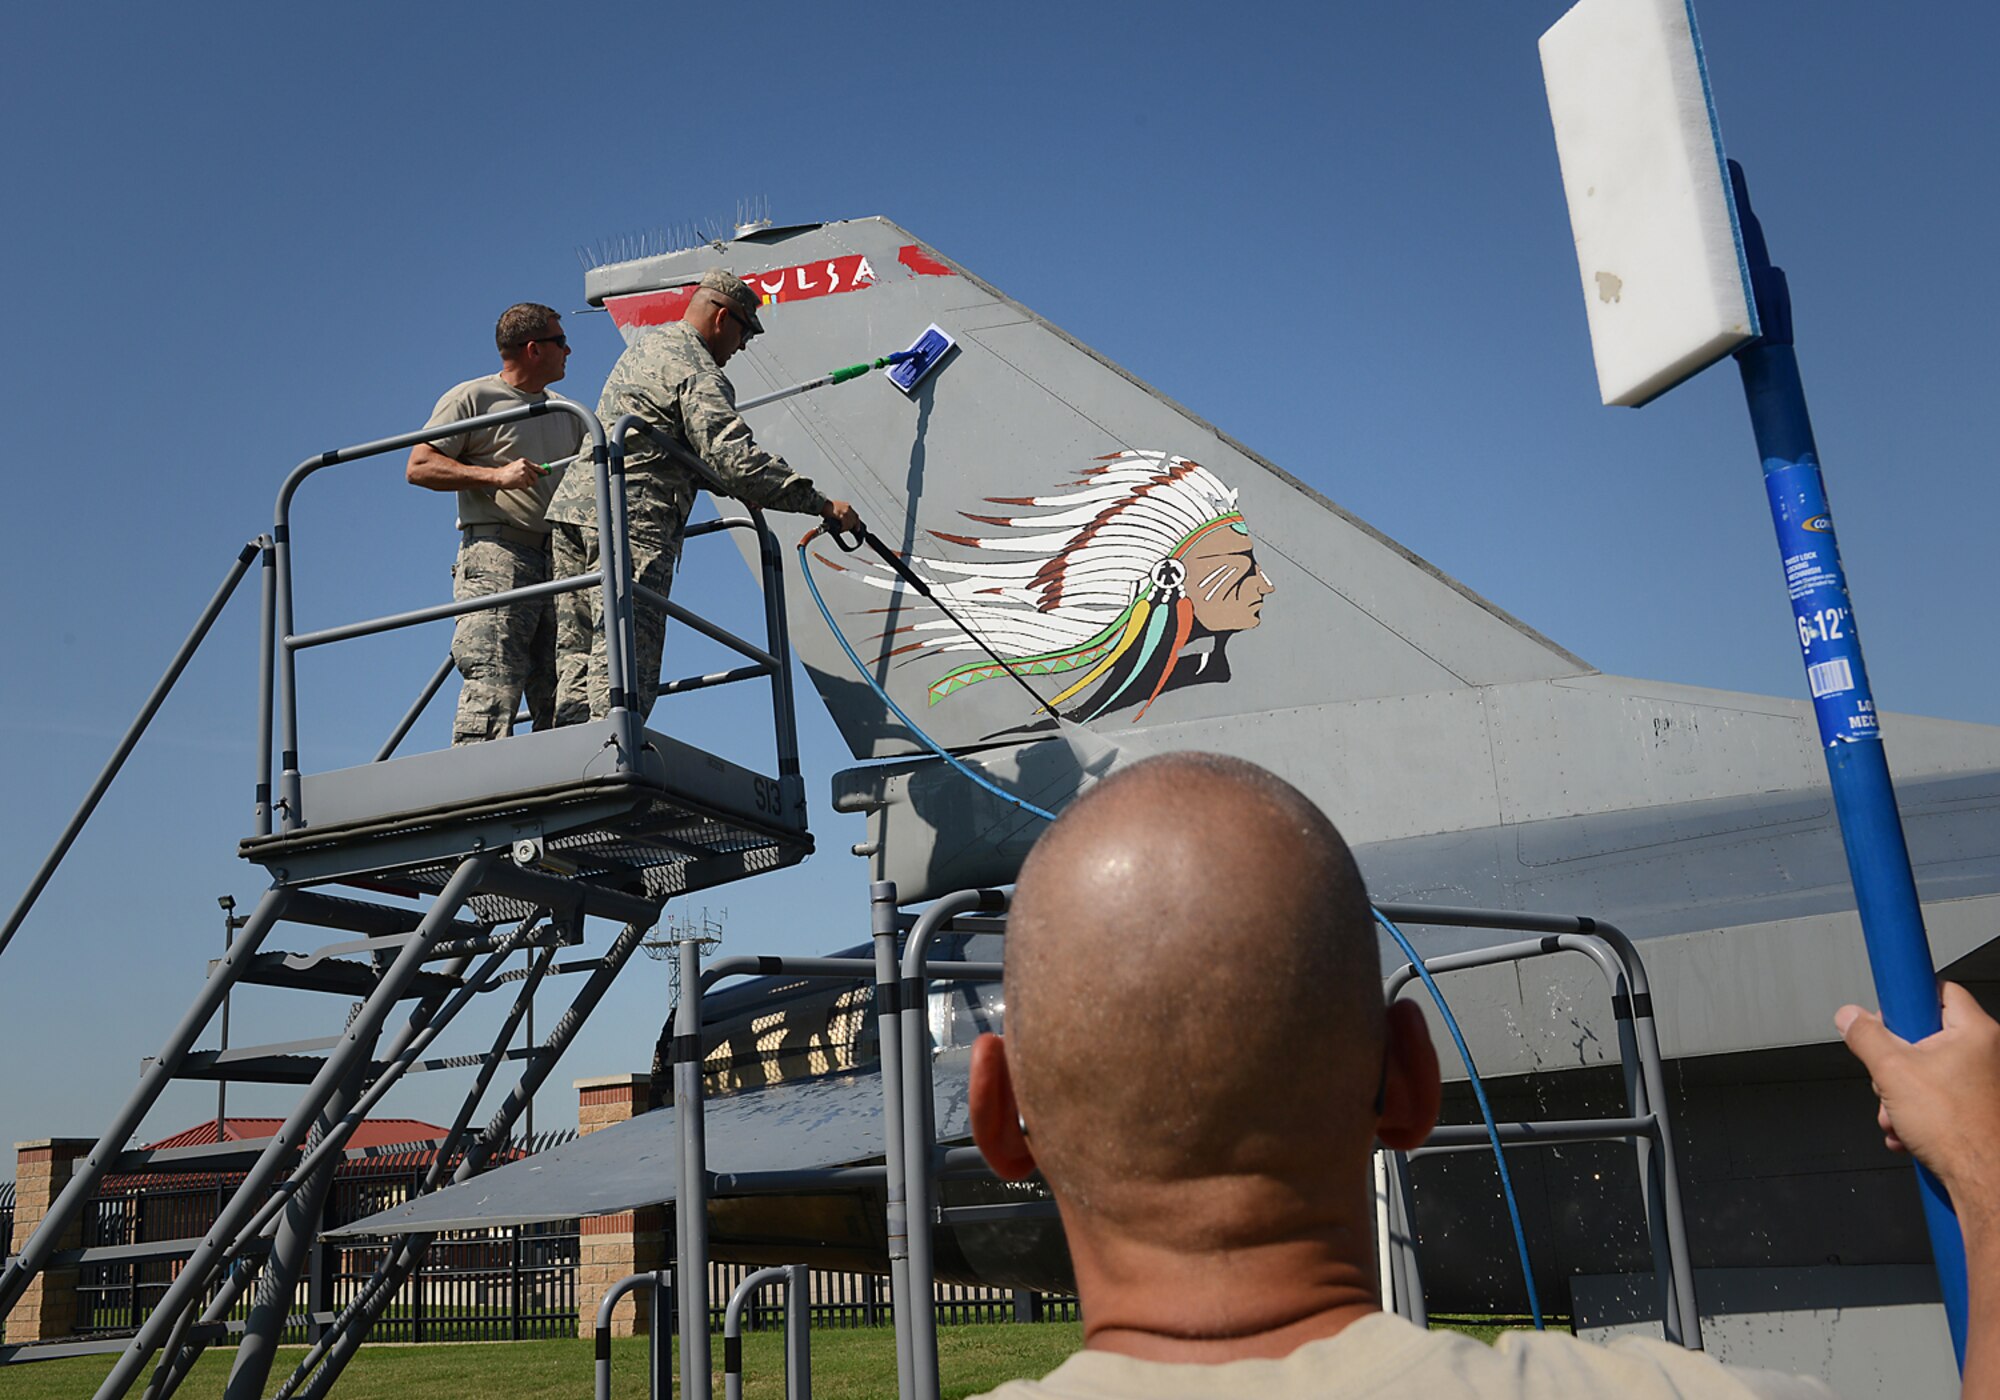 Chief Master Sergeant Dennis Dipiazzo, 138th Communications Flight Chief, stands ready to scrub as Lieutenant Colonel Travis Brown, 138th Maintenance Squadron Commander and Chief Master Sergeant Tracey Weaver, 138th Aircraft Maintenance Chief, power wash the tail of an F-16 static display aircraft at the Tulsa Air National Guard base, Tulsa Okla., 29 July 2014.  Members of the 138th FW Chiefs Council gathered to wash the static aircraft in an effort to keep them looking nice for public display.  (U.S. National Guard photo by Senior Master Sgt.  Preston L. Chasteen/Released)